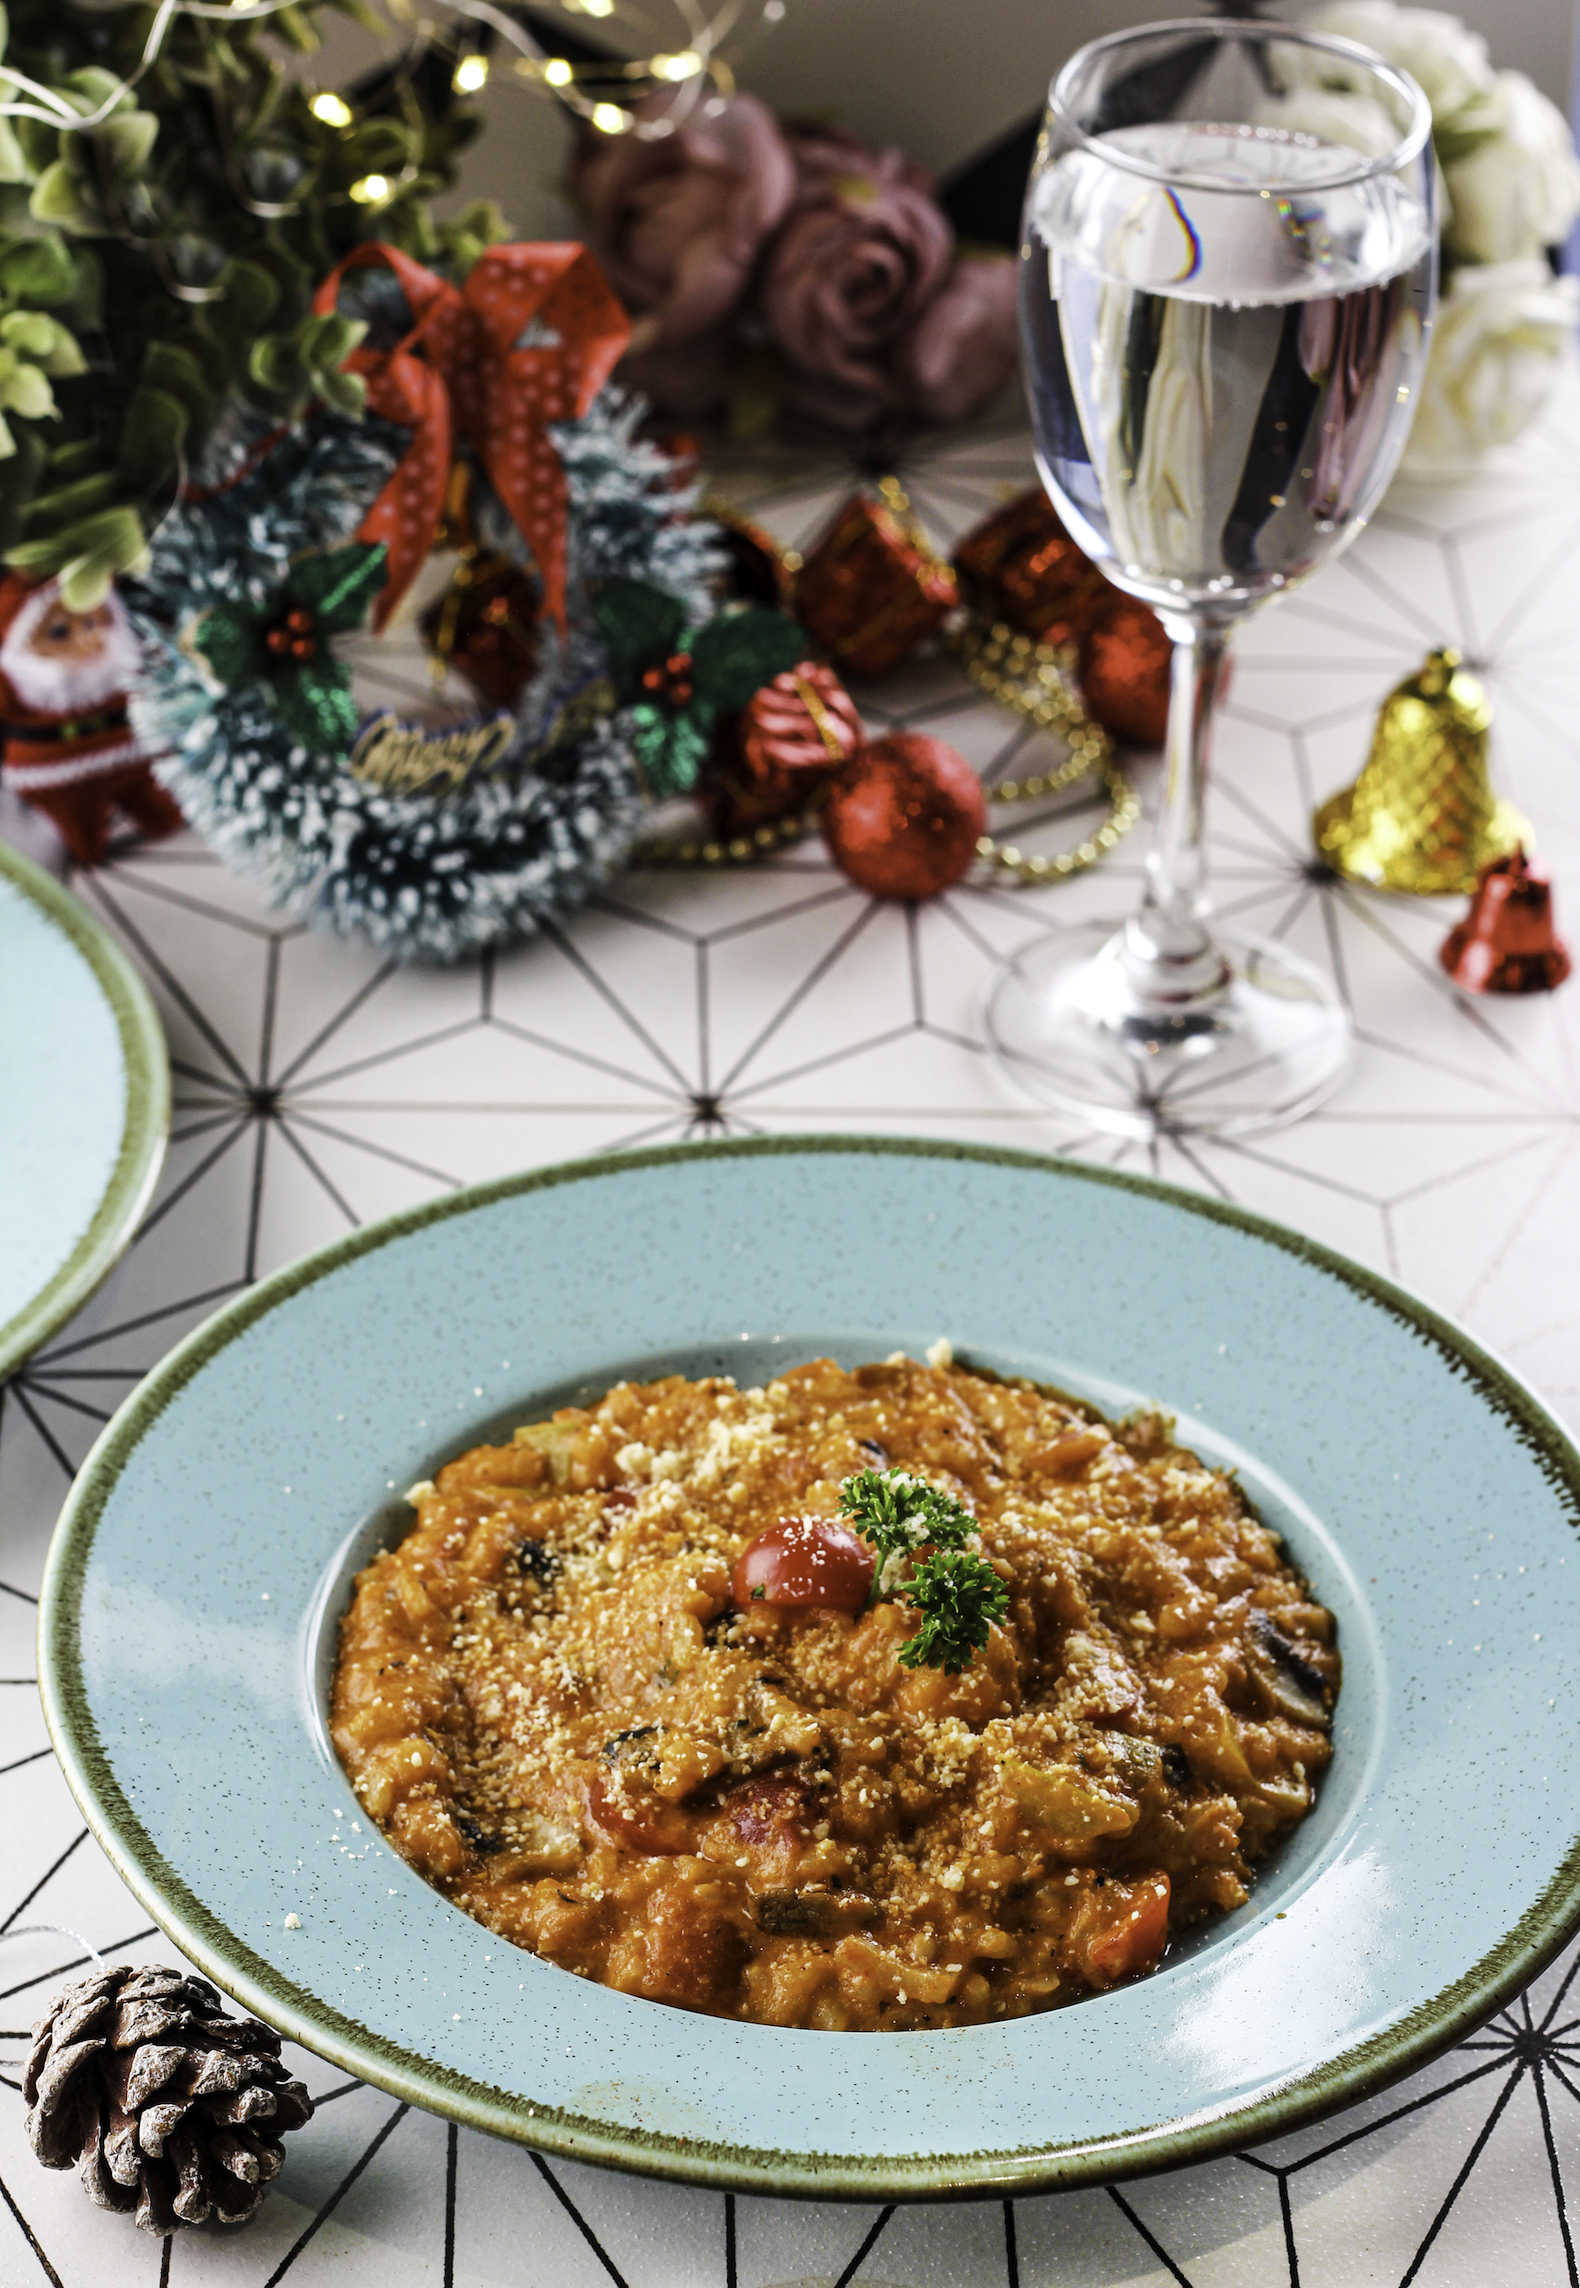 Cafe 49 Introduces Exquisite Holiday Festive Menu This Christmas